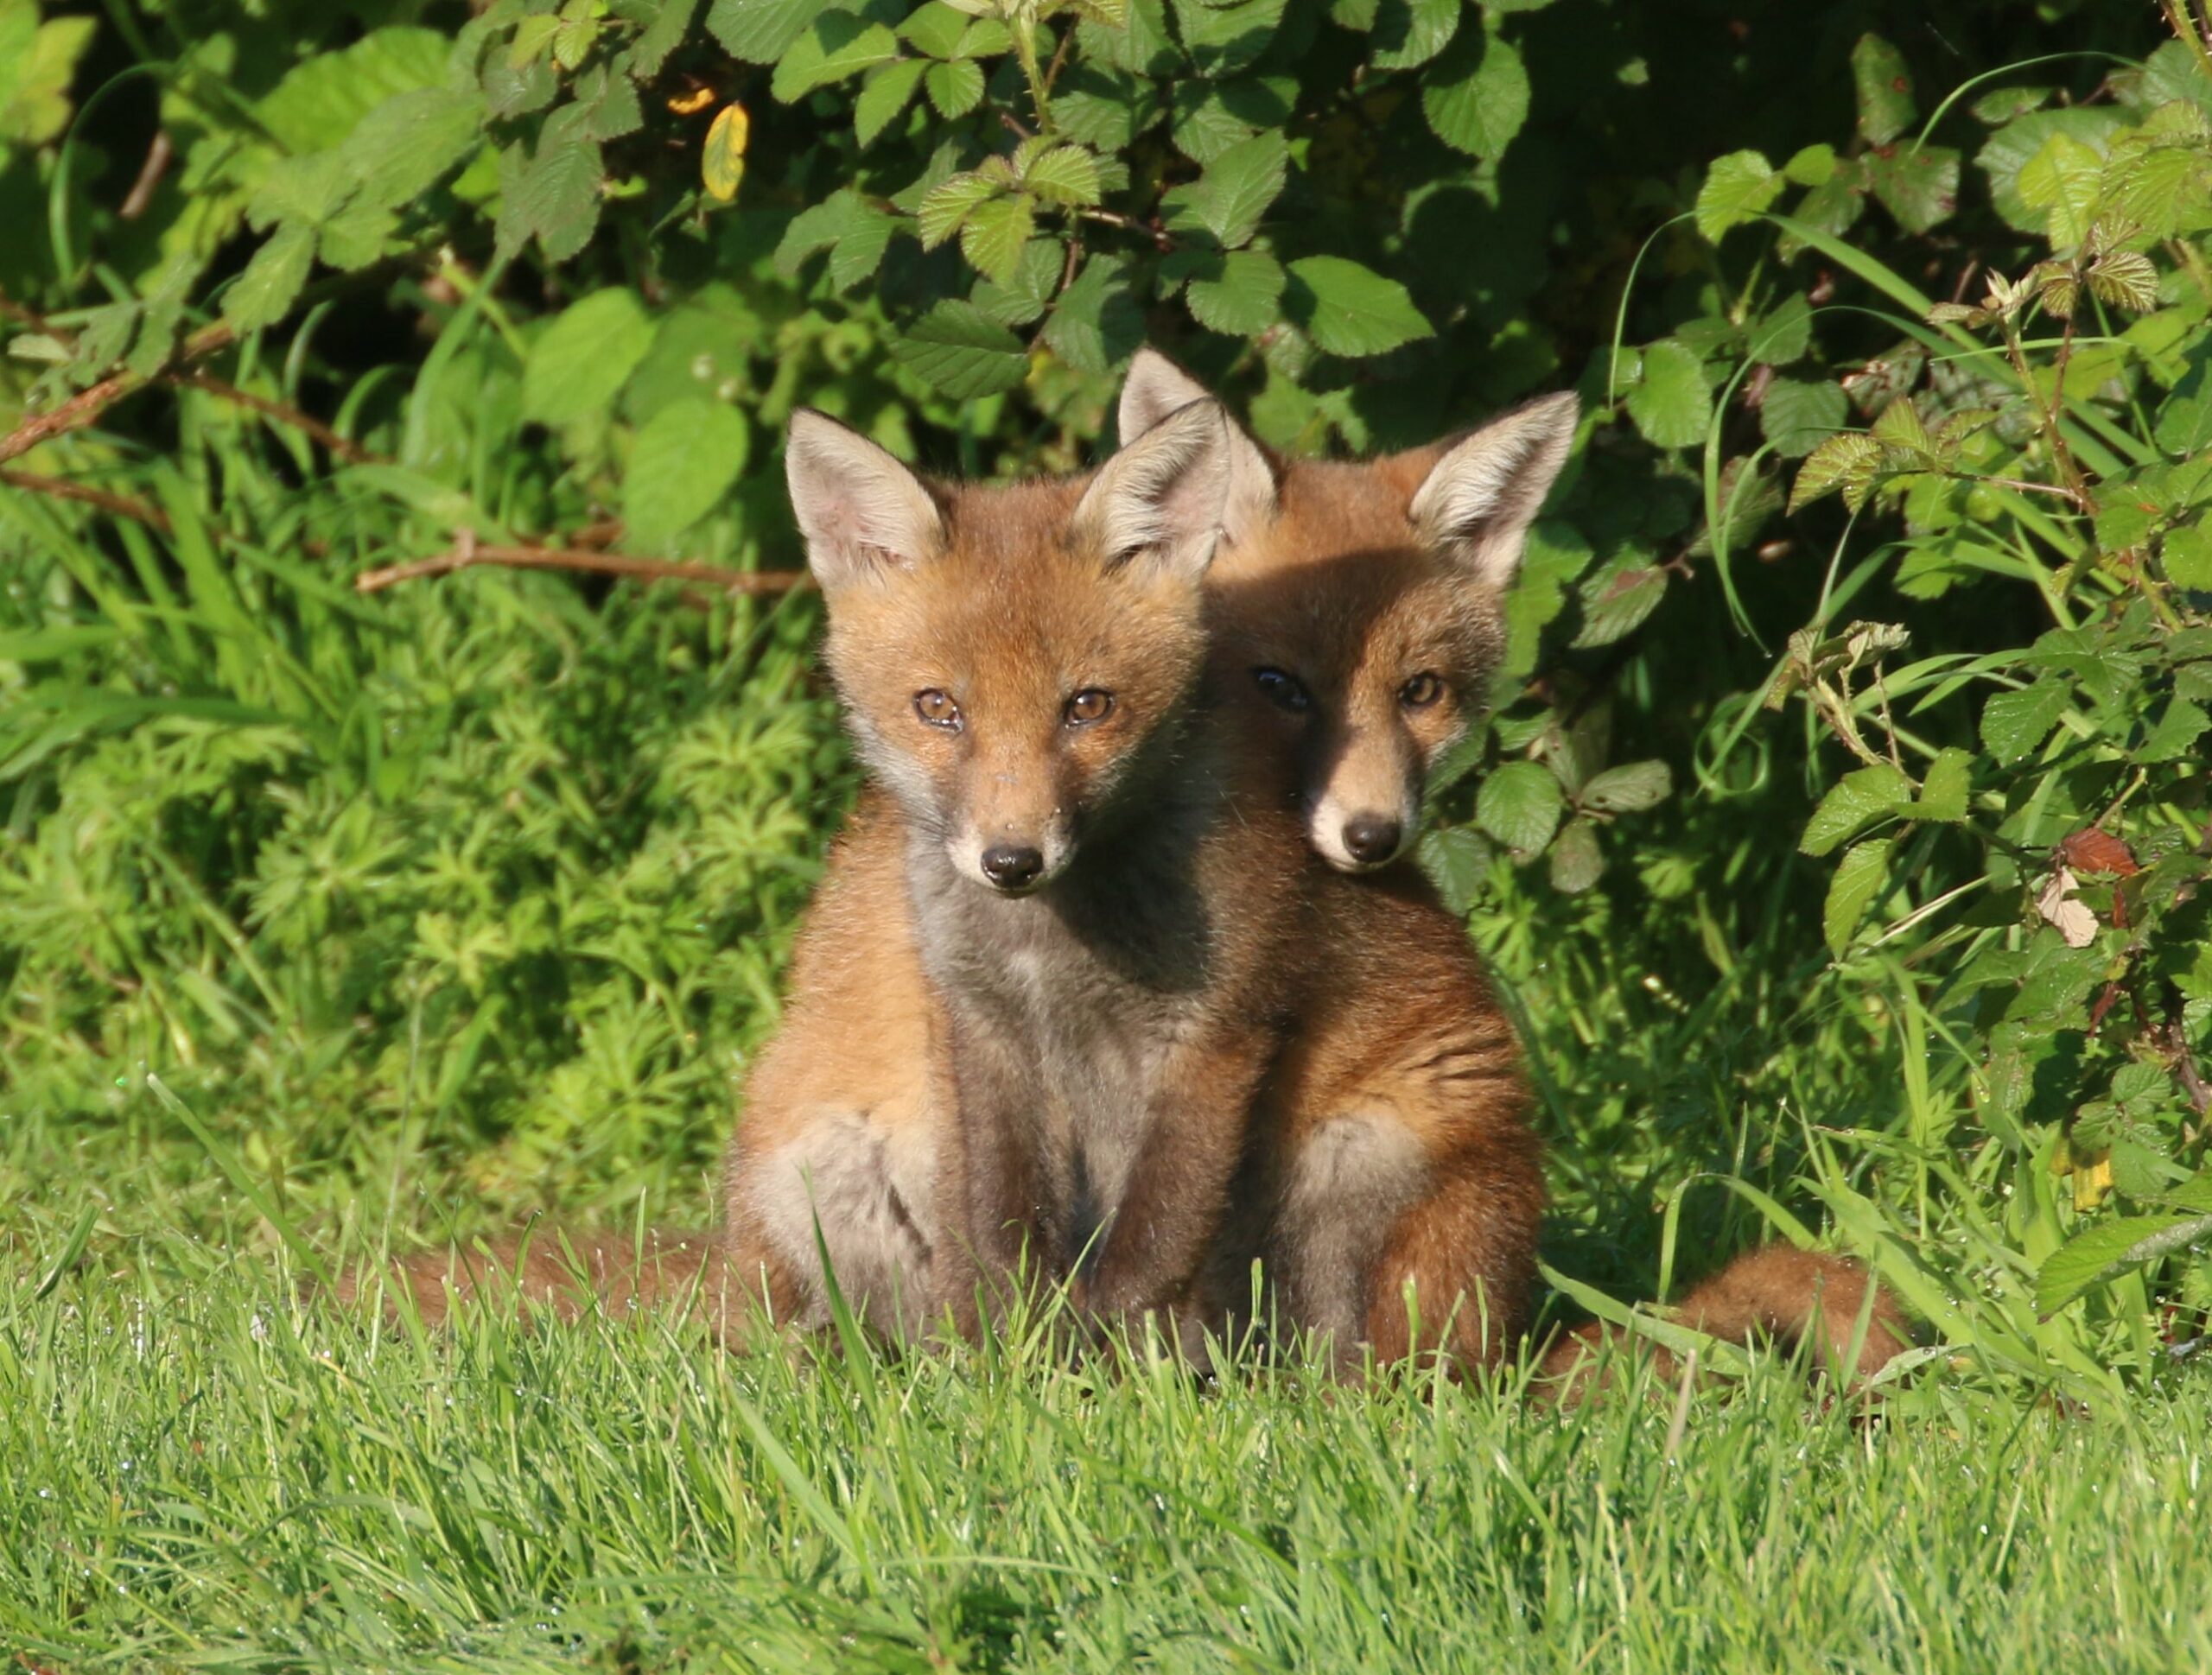 Two fox clubs